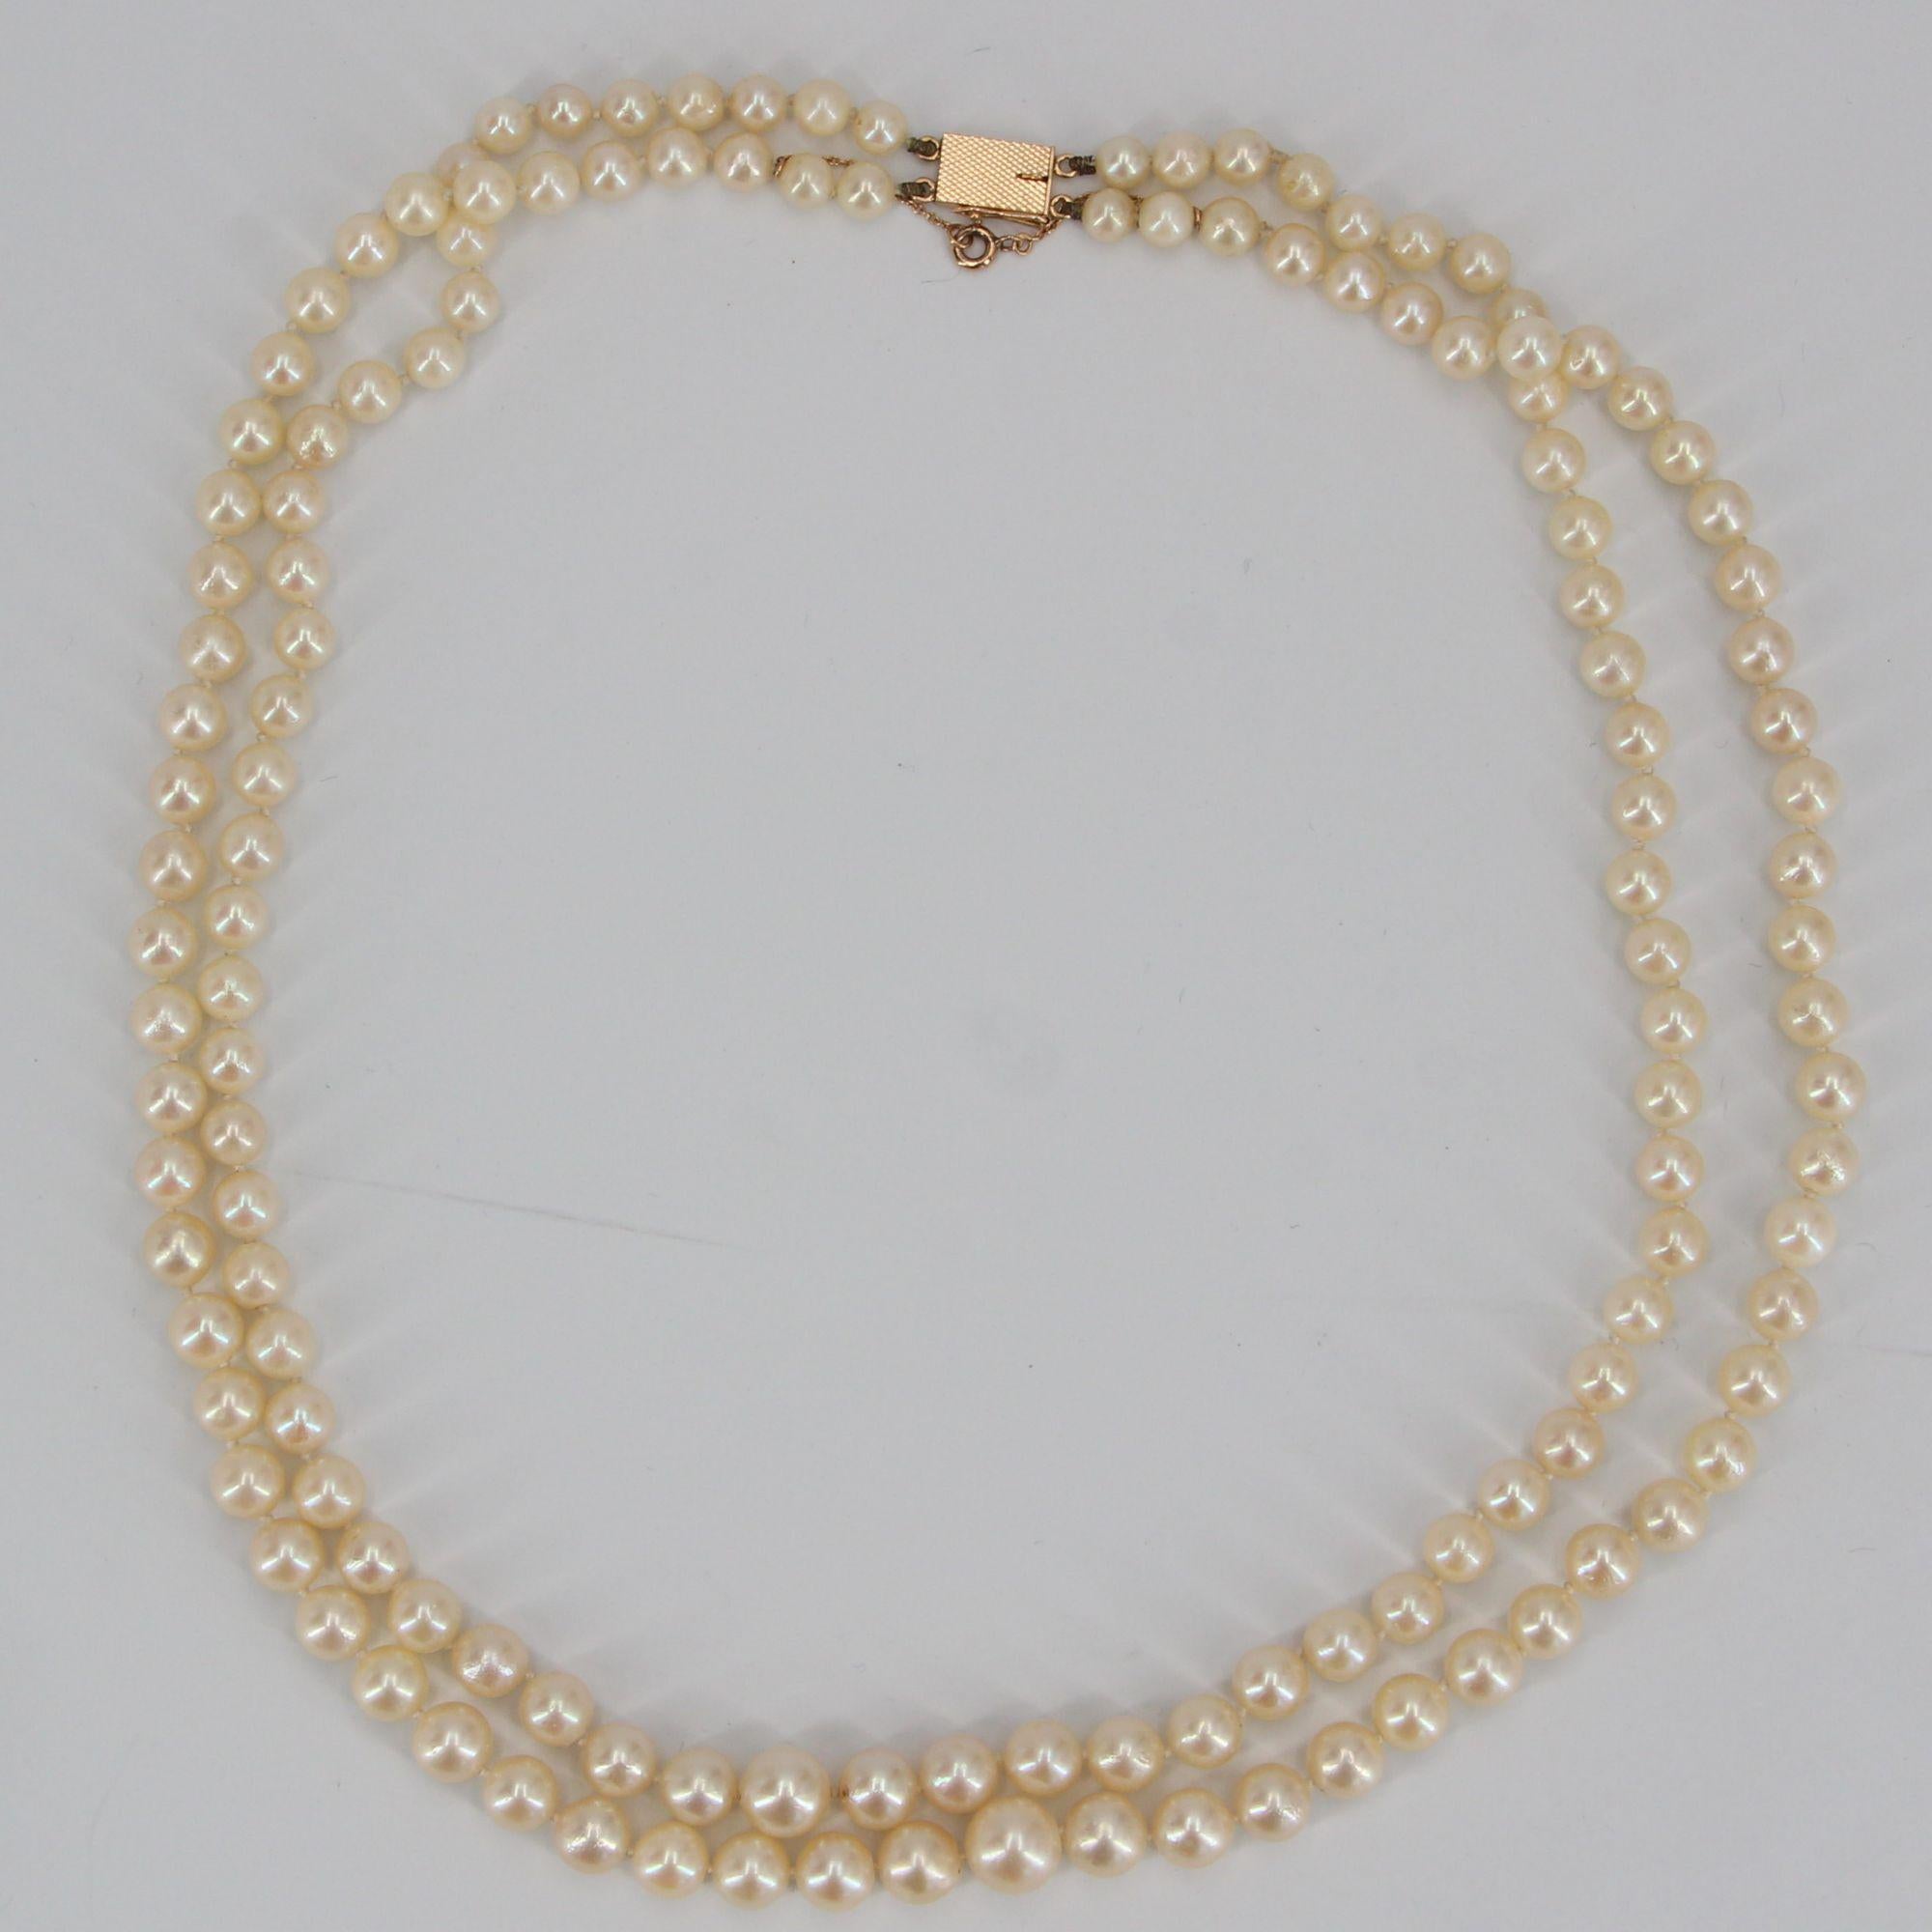 Retro French 1950s Double Row Cultured Falling Pearl Necklace